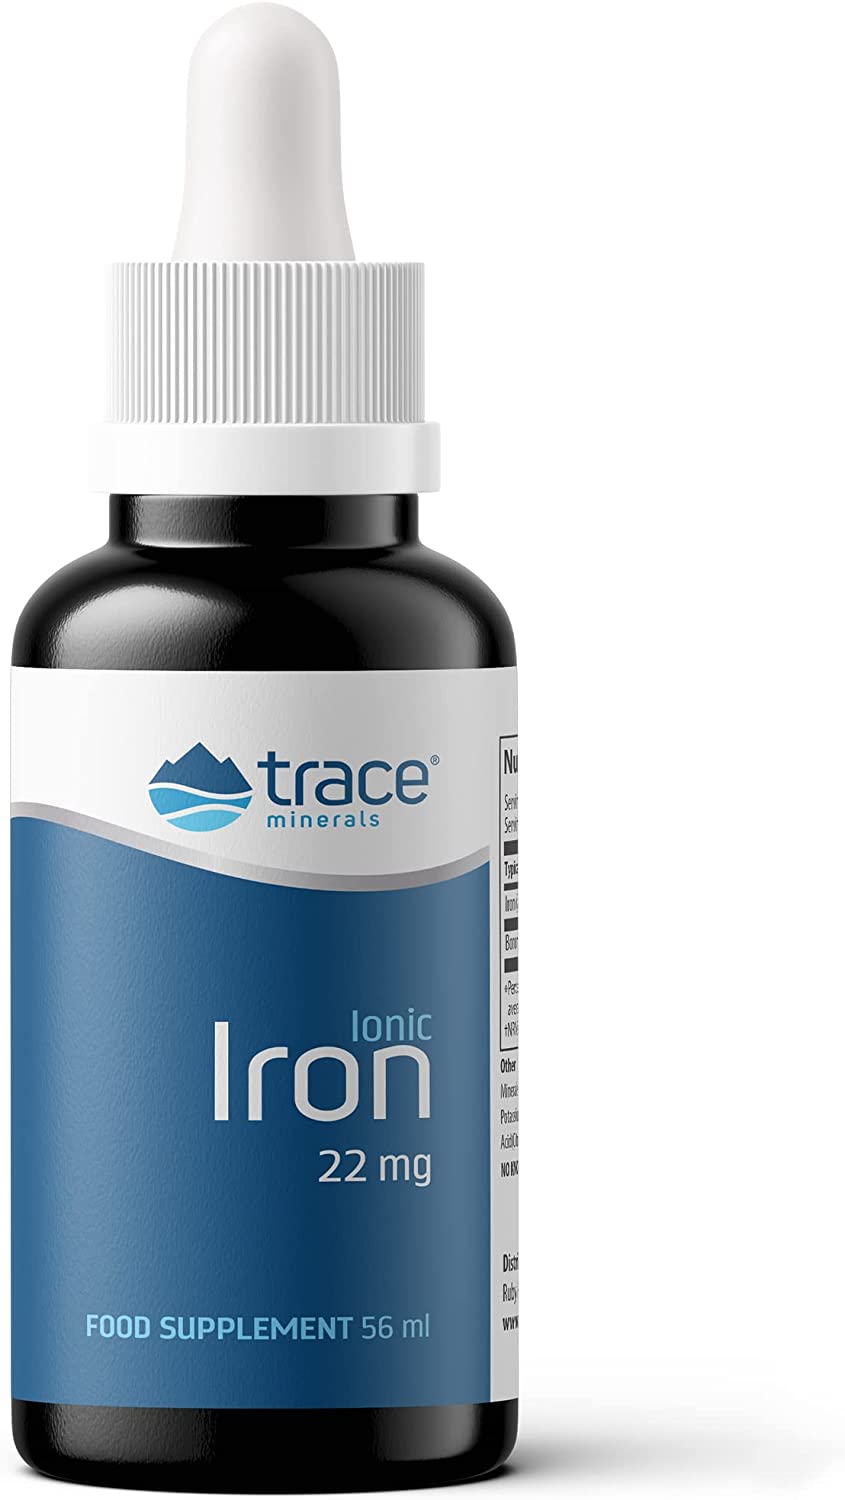 Trace Minerals Research Ionic Iron 22mg, 56ml